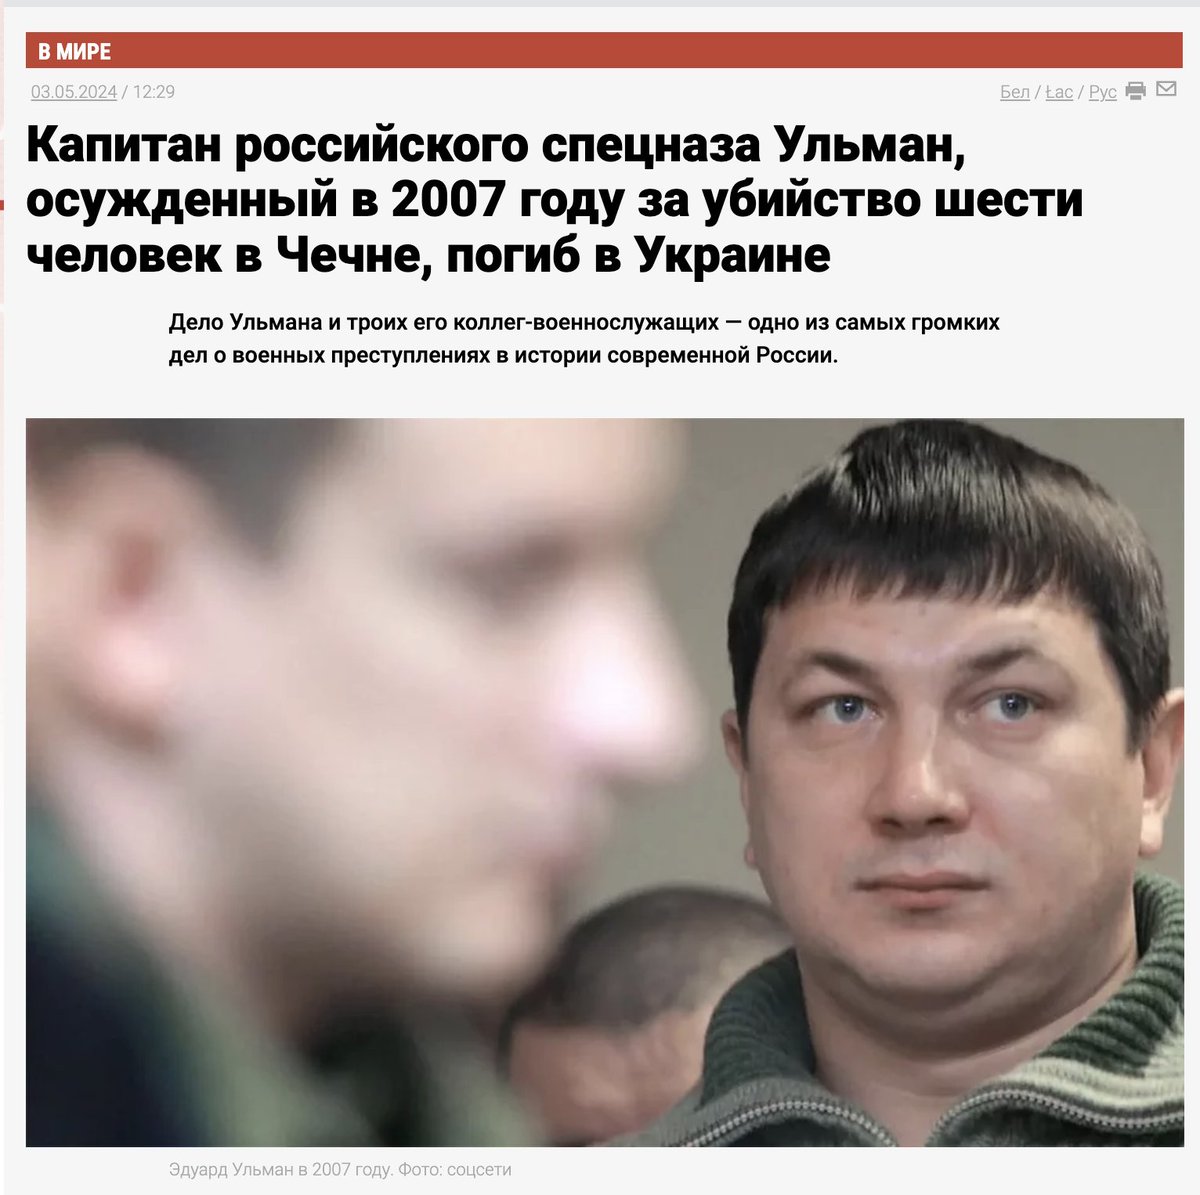 Russian war criminal Eduard Ulman died in the war in Ukraine. In 2002, he killed 6 civilians in Chechnya. A Russian court sentenced Ullman to 14 years in prison. But Ullman escaped and was wanted. Now it turned out that no one was looking for him. He was in the Russian army